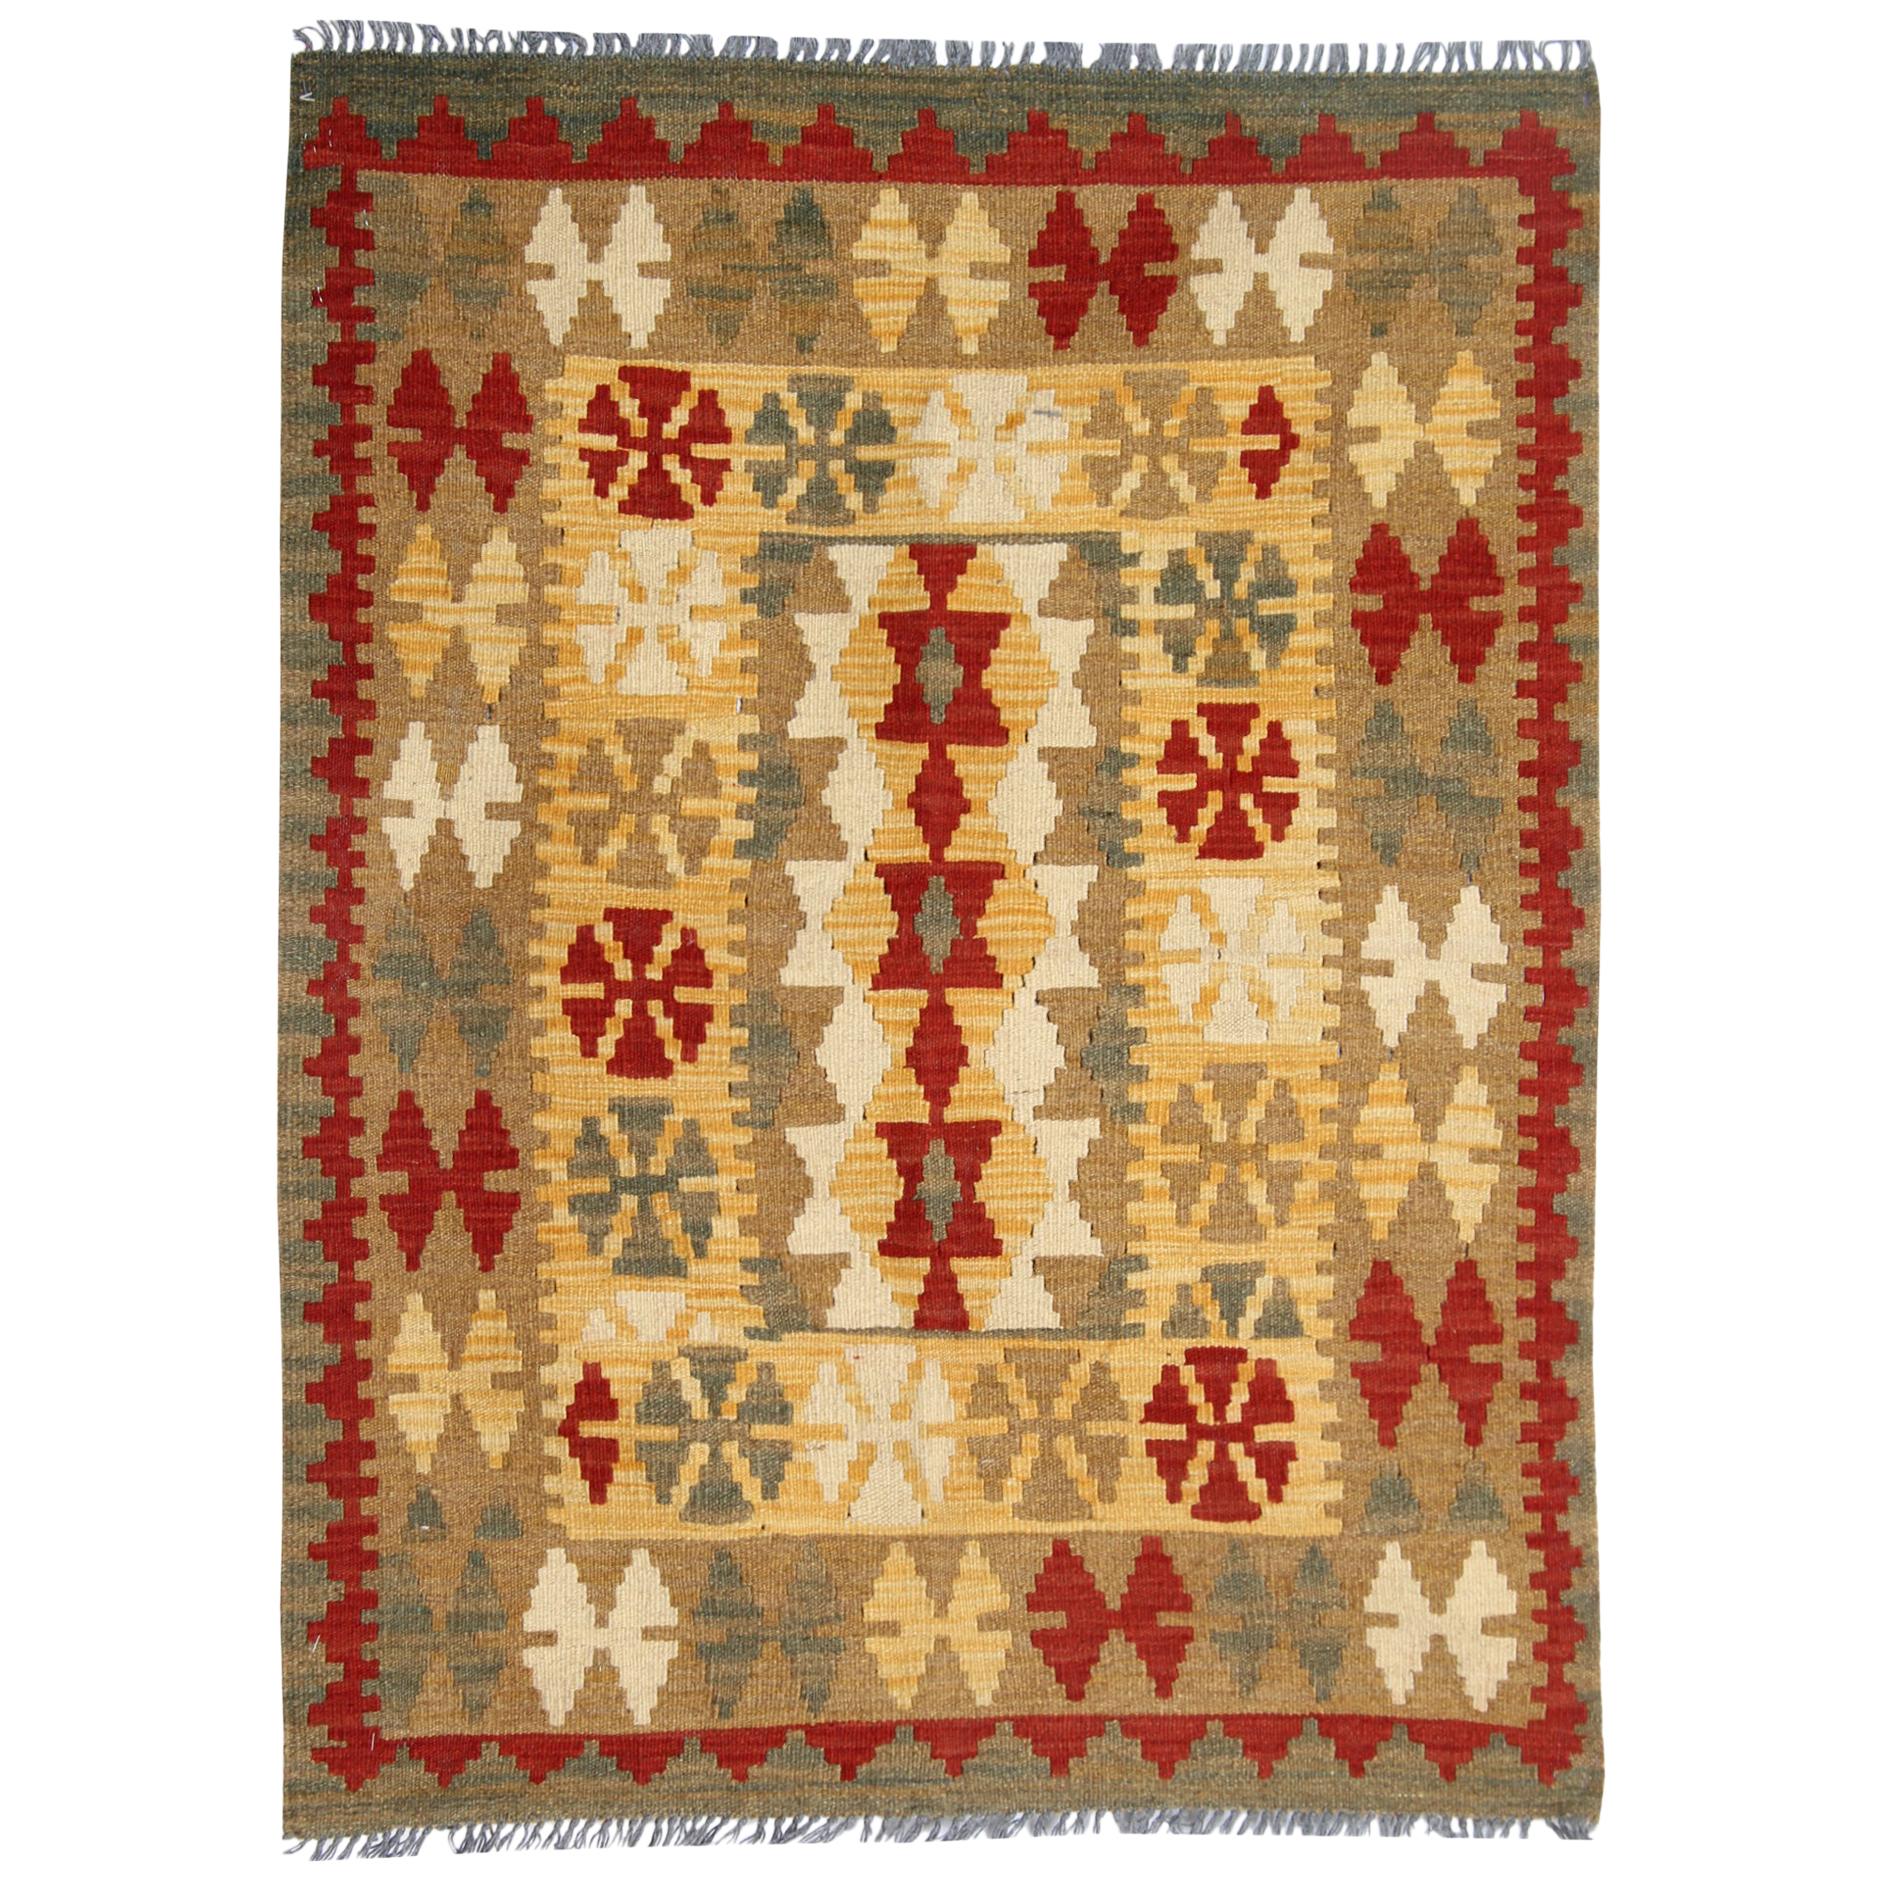 Small Hand Woven Oriental Kilim Traditional Wool Red Green Rug 82x116cm